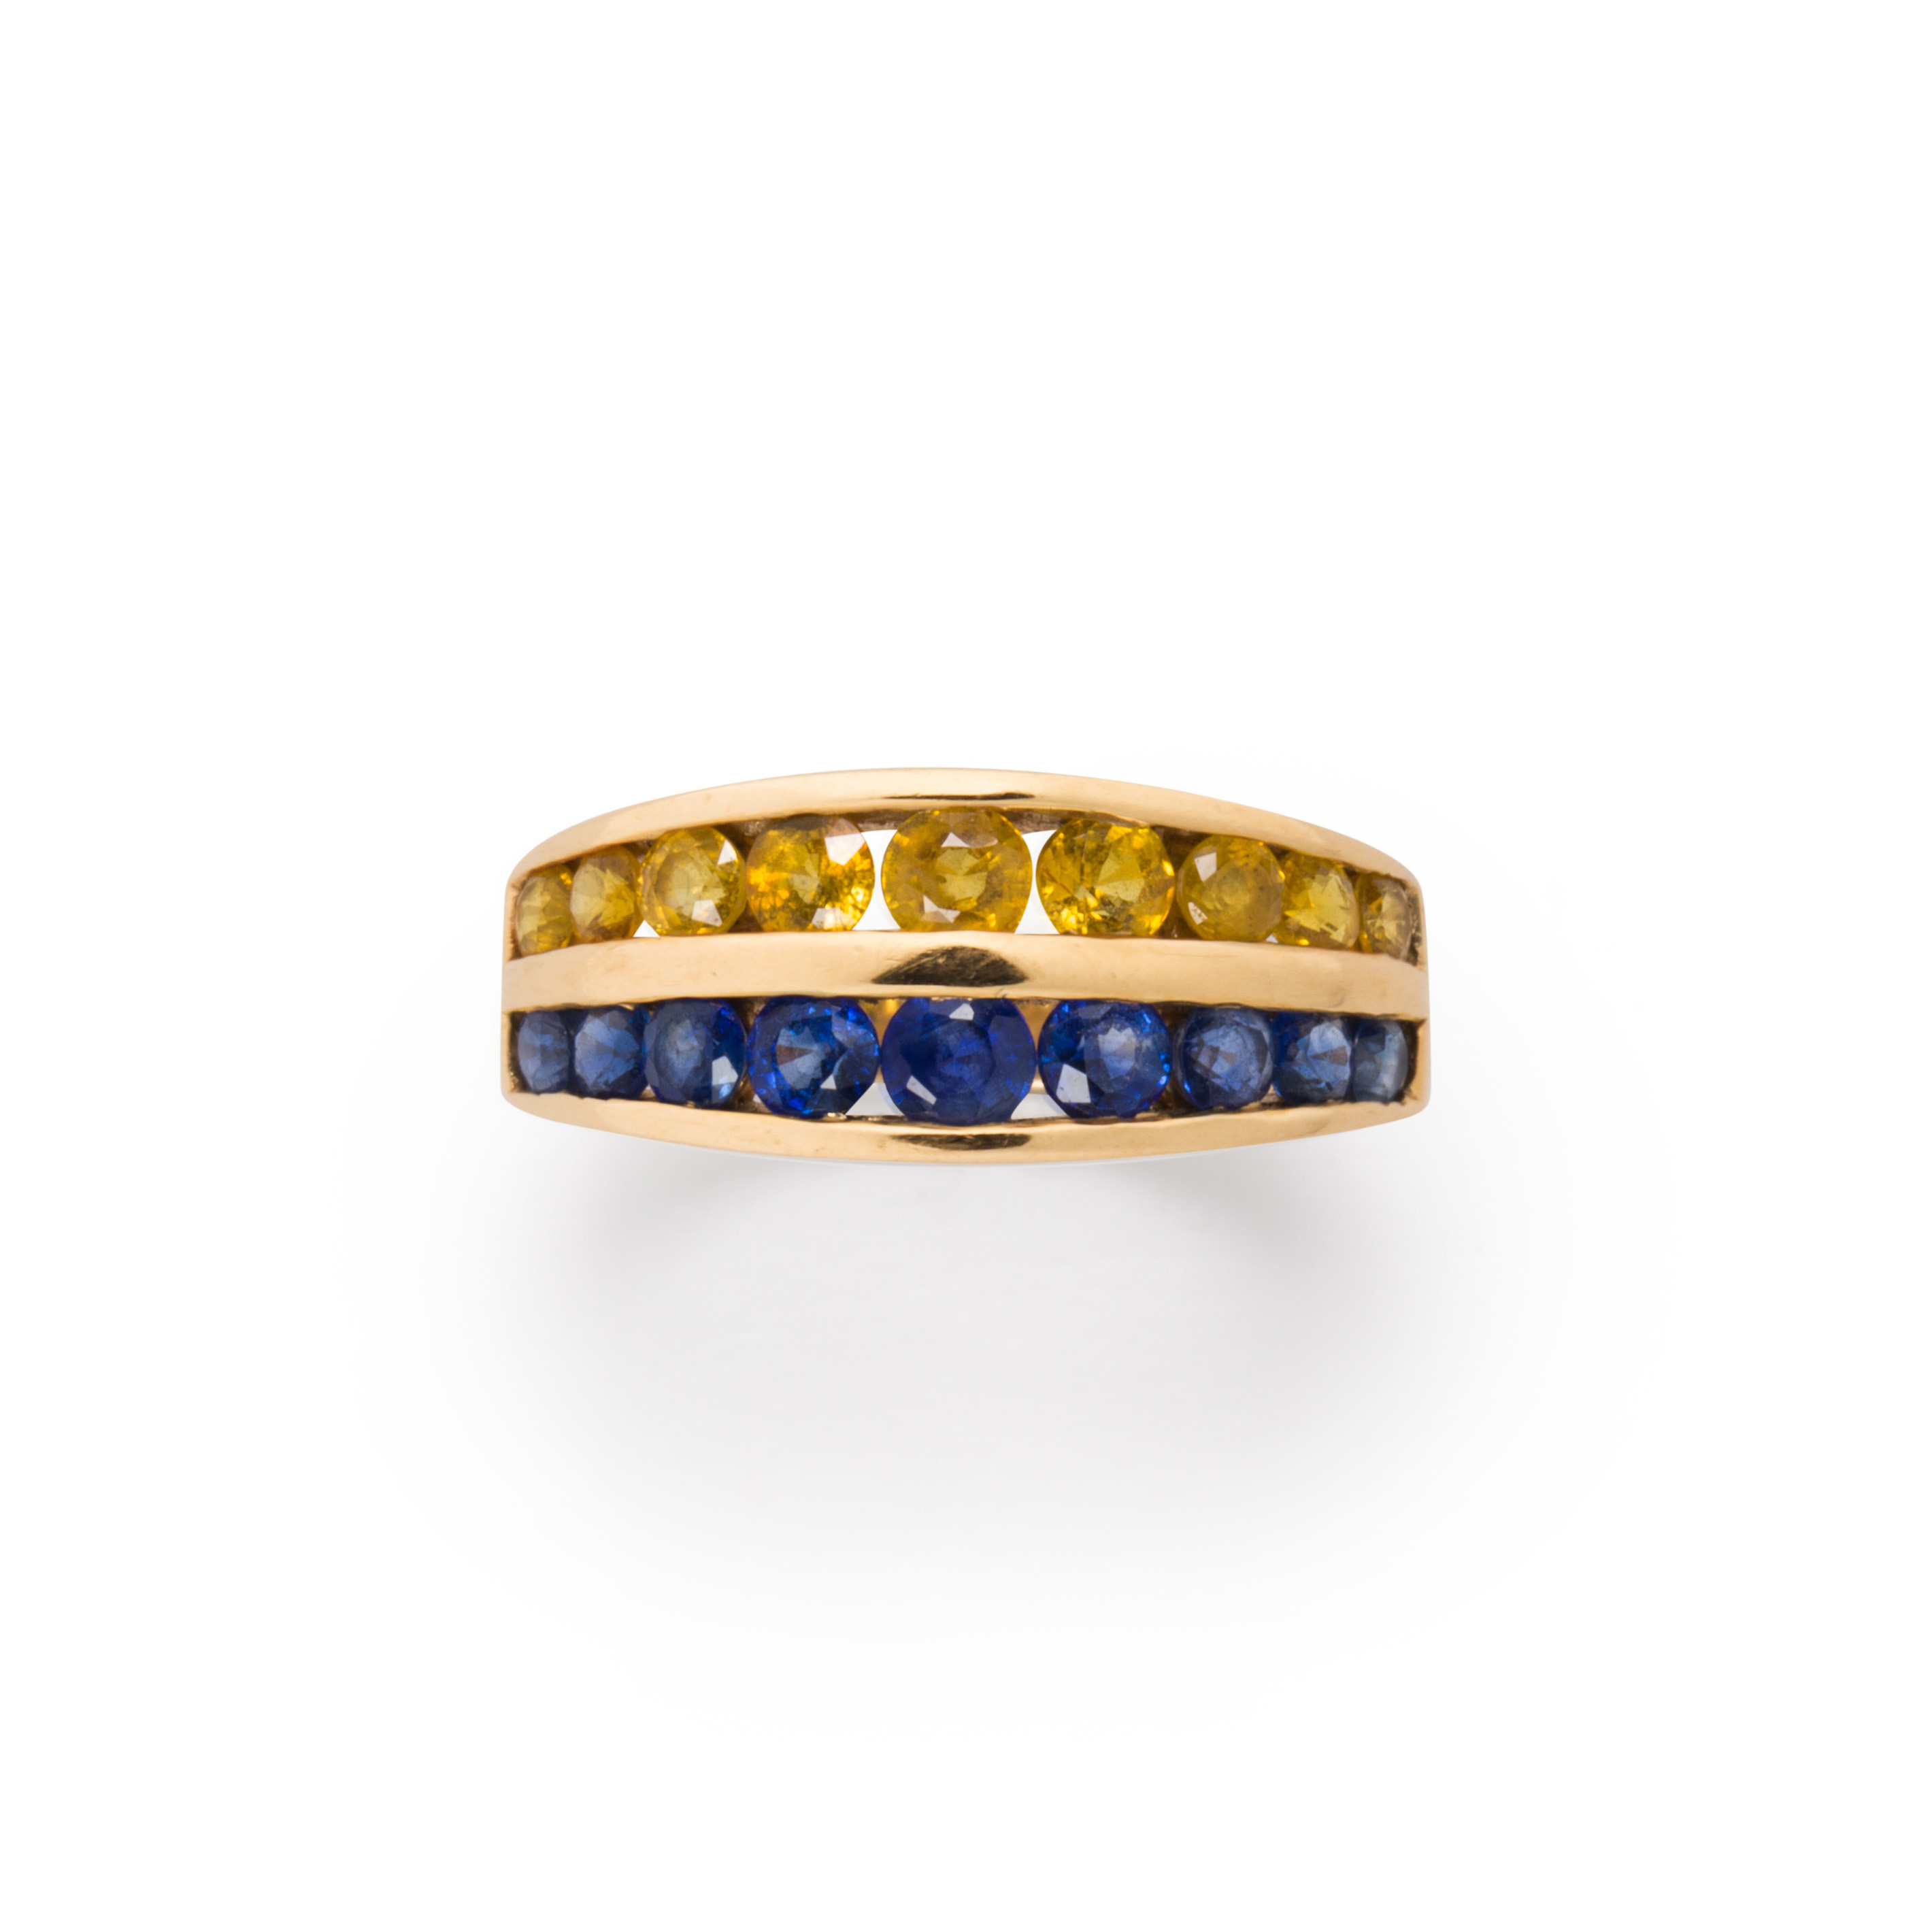 A YELLOW OR BLUE SAPPHIRE AND FOURTEEN 3a2611